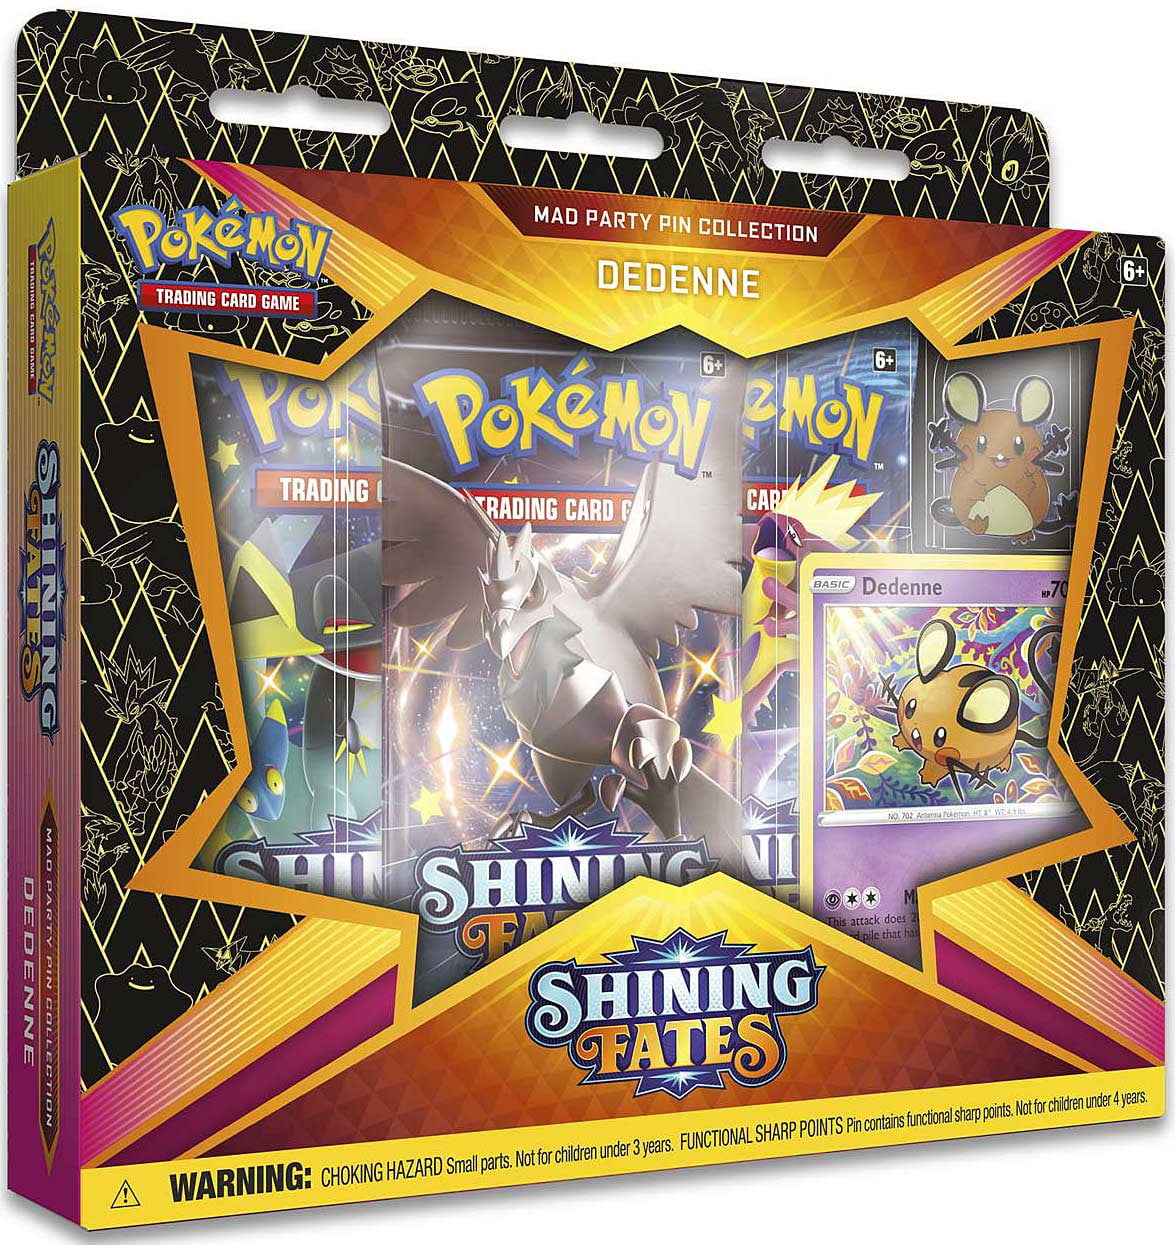 Pokémon TCG Shining Fates Mad Party Pin Collections Box BUNNELBY FACTORY SEALED 